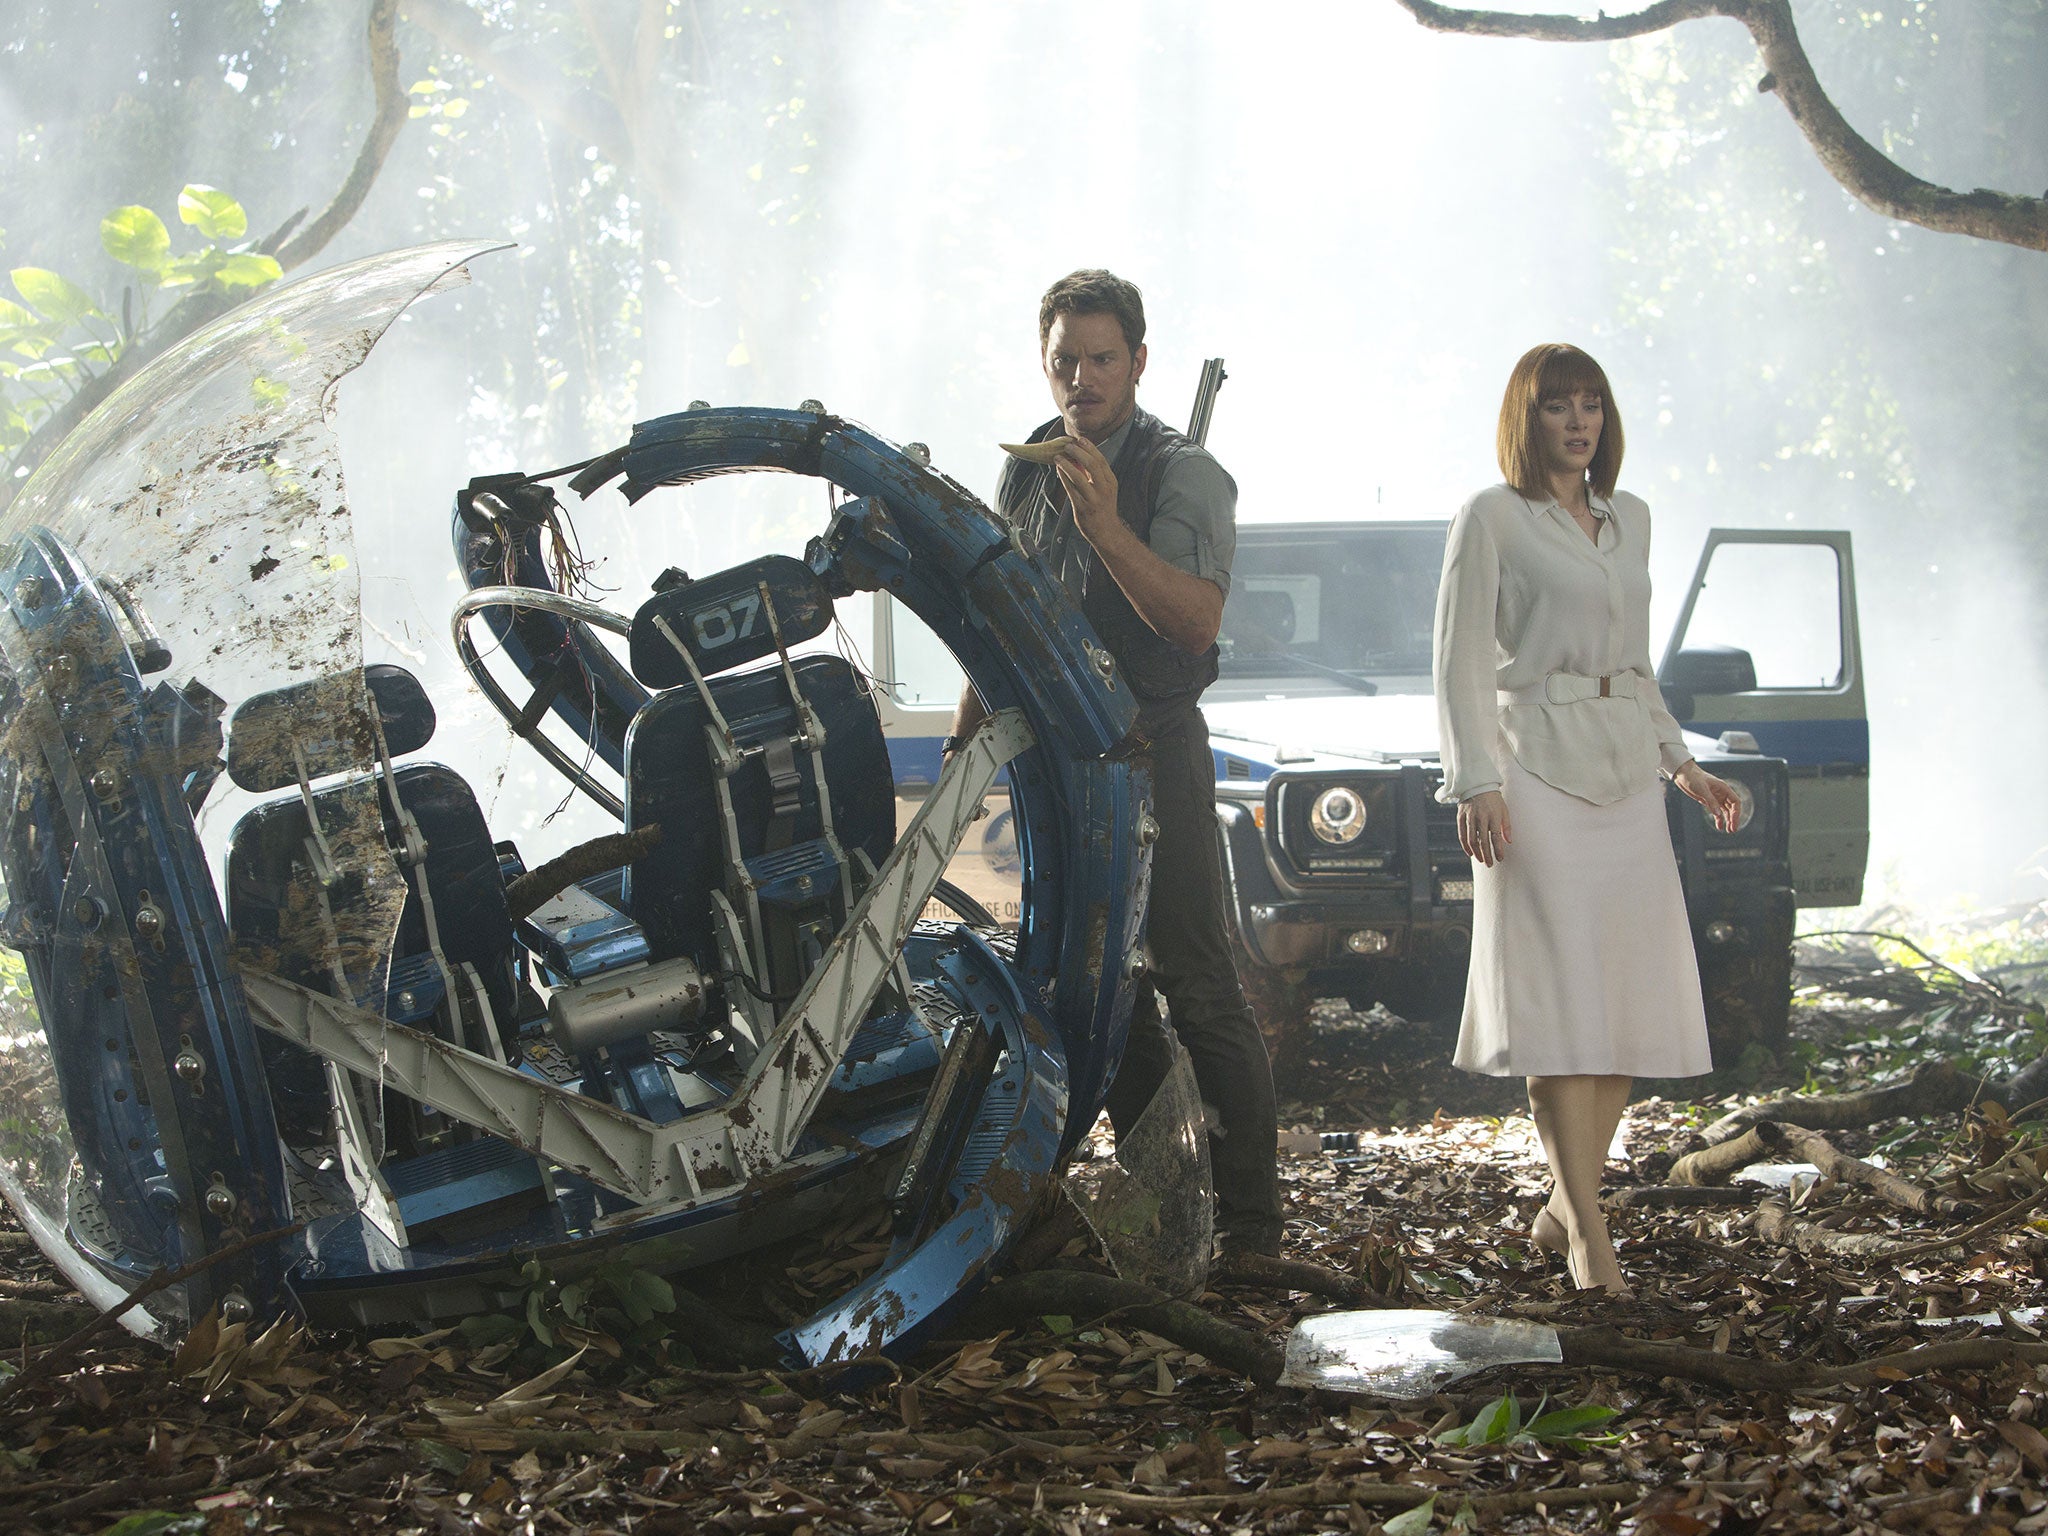 Bryce Dallas Howard spent the whole of Jurassic World trekking through a jungle in heels